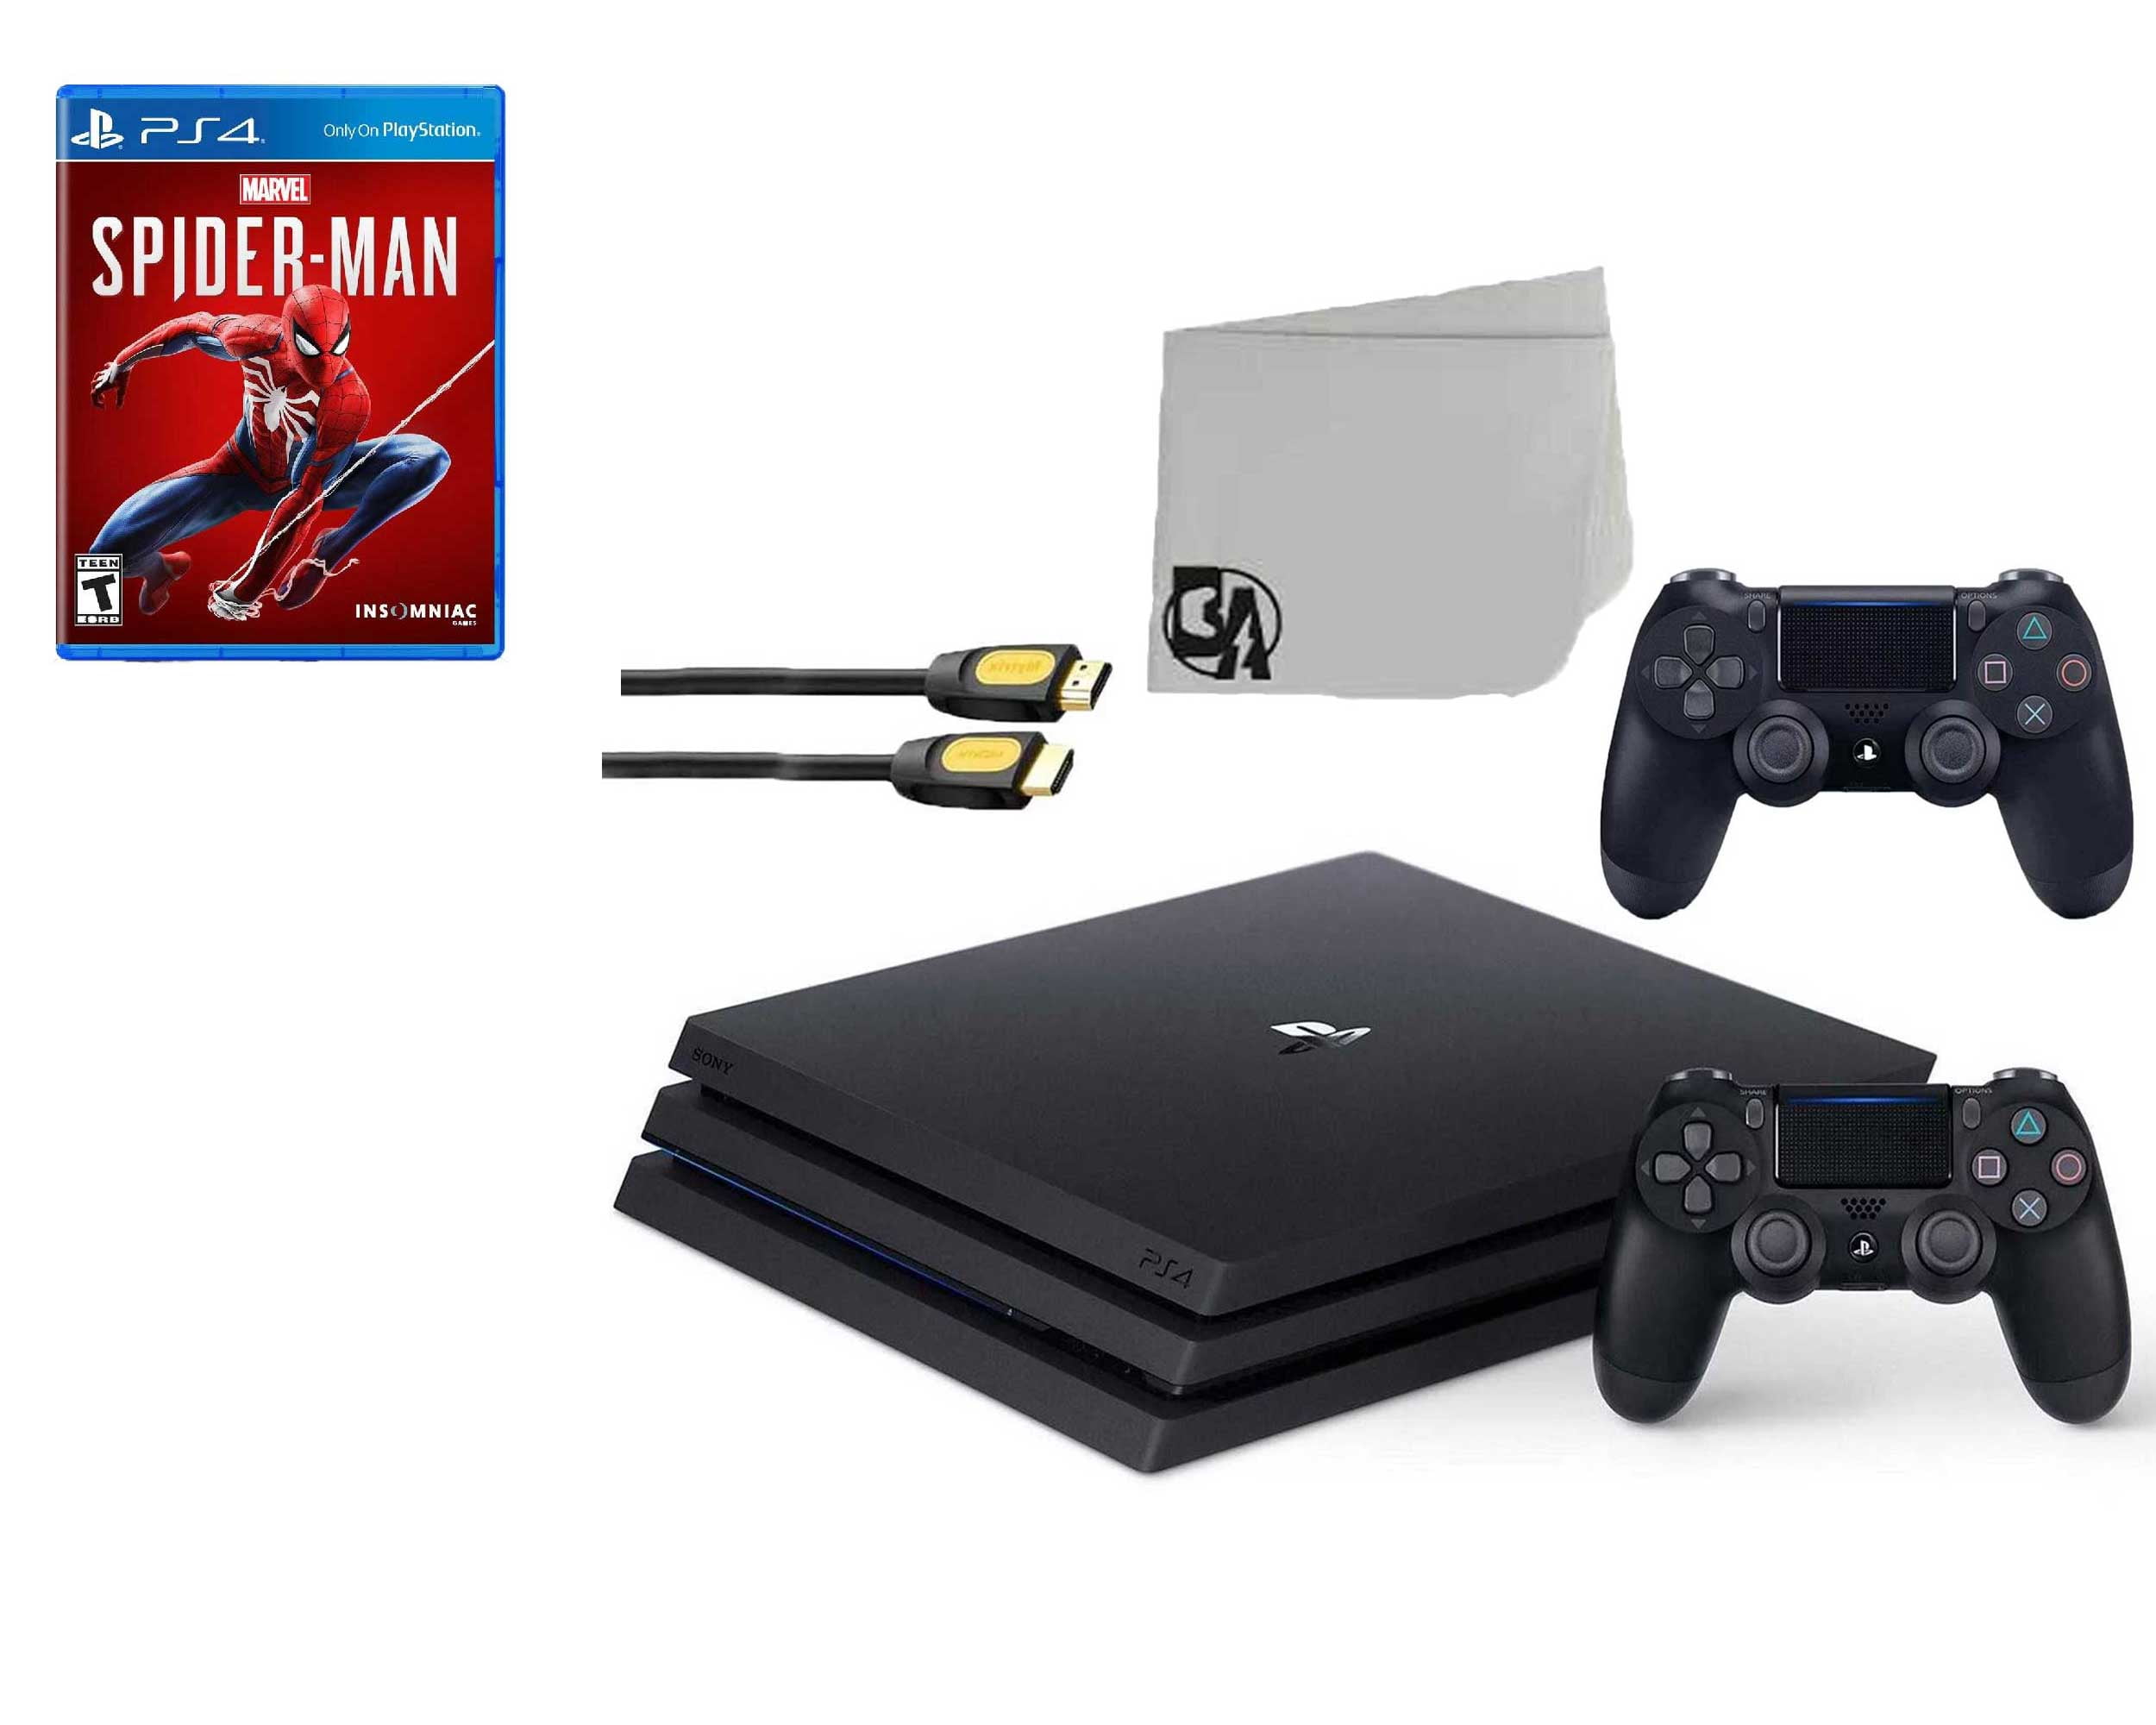 Sony PlayStation 4 Pro 1TB Gaming Console Black 2 Controller Included with Battlefield 1 BOLT Bundle Used Walmart.com